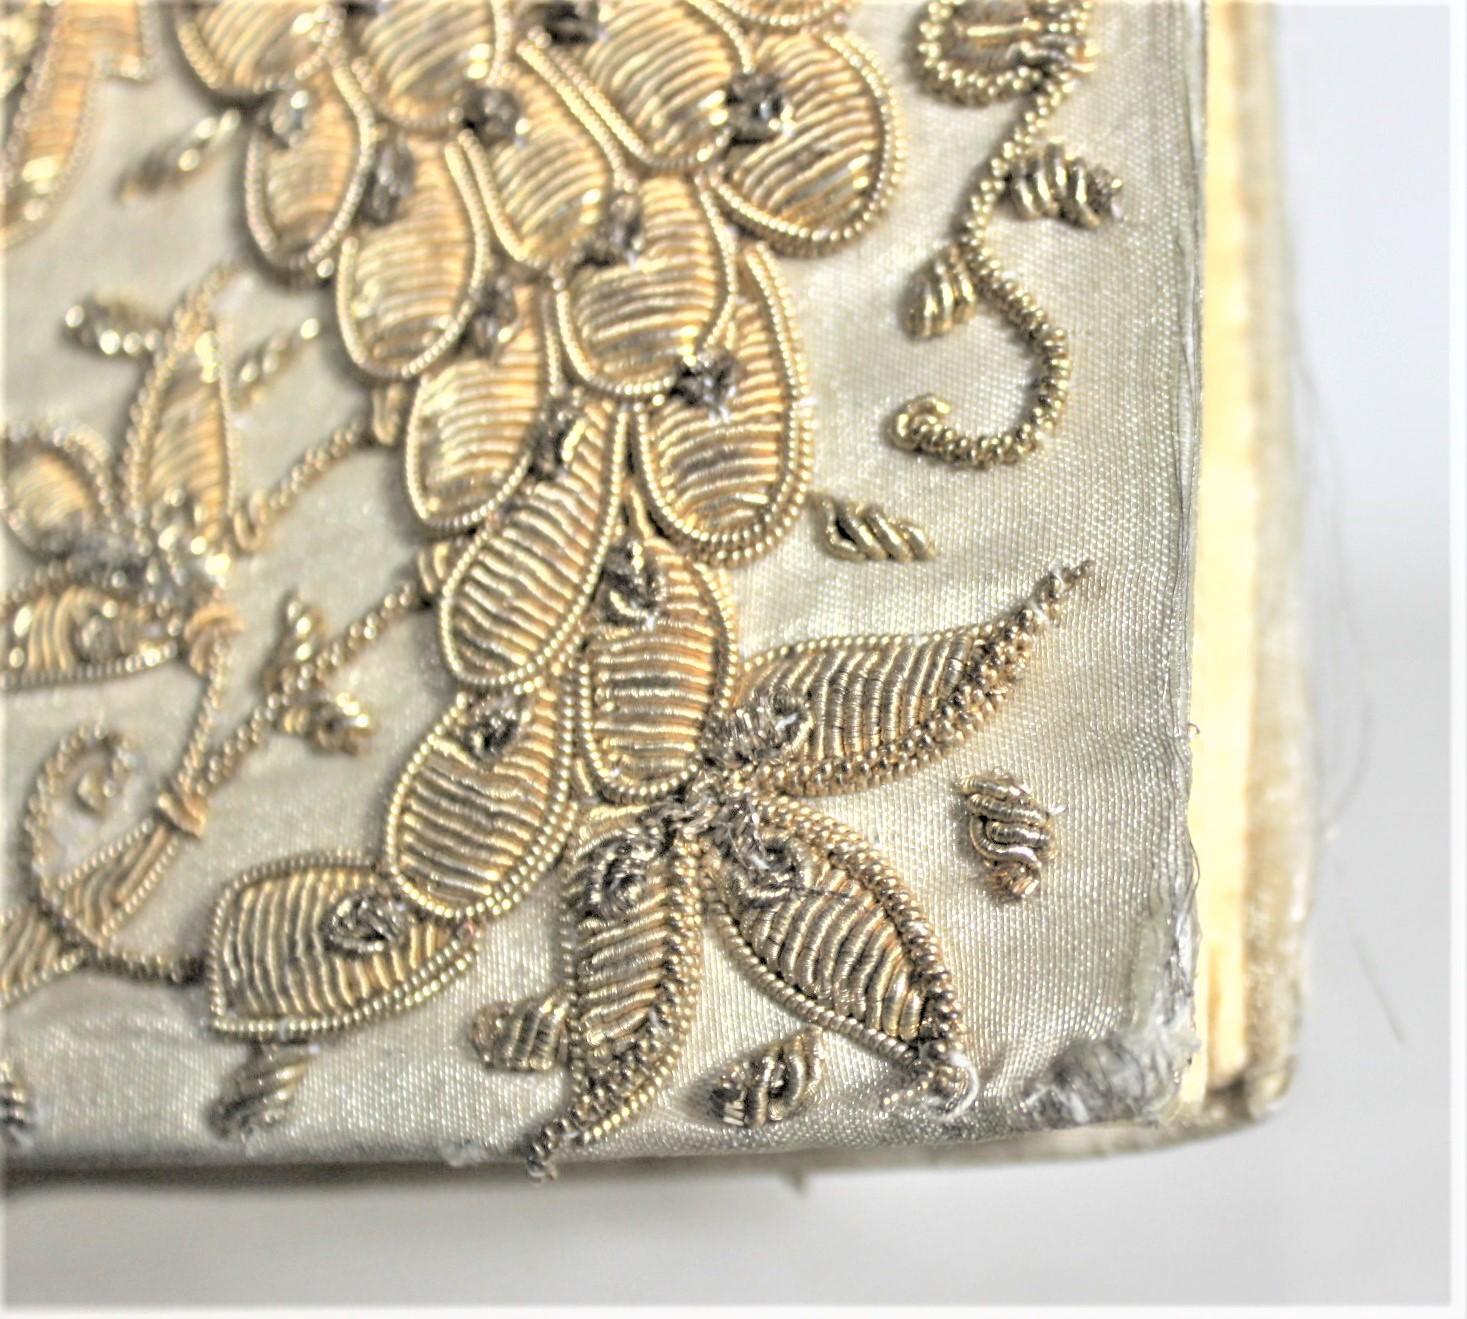 Vintage Anglo-Indian Hand-Crafted Clutch Purse or Evening Bag with Embroidery For Sale 2